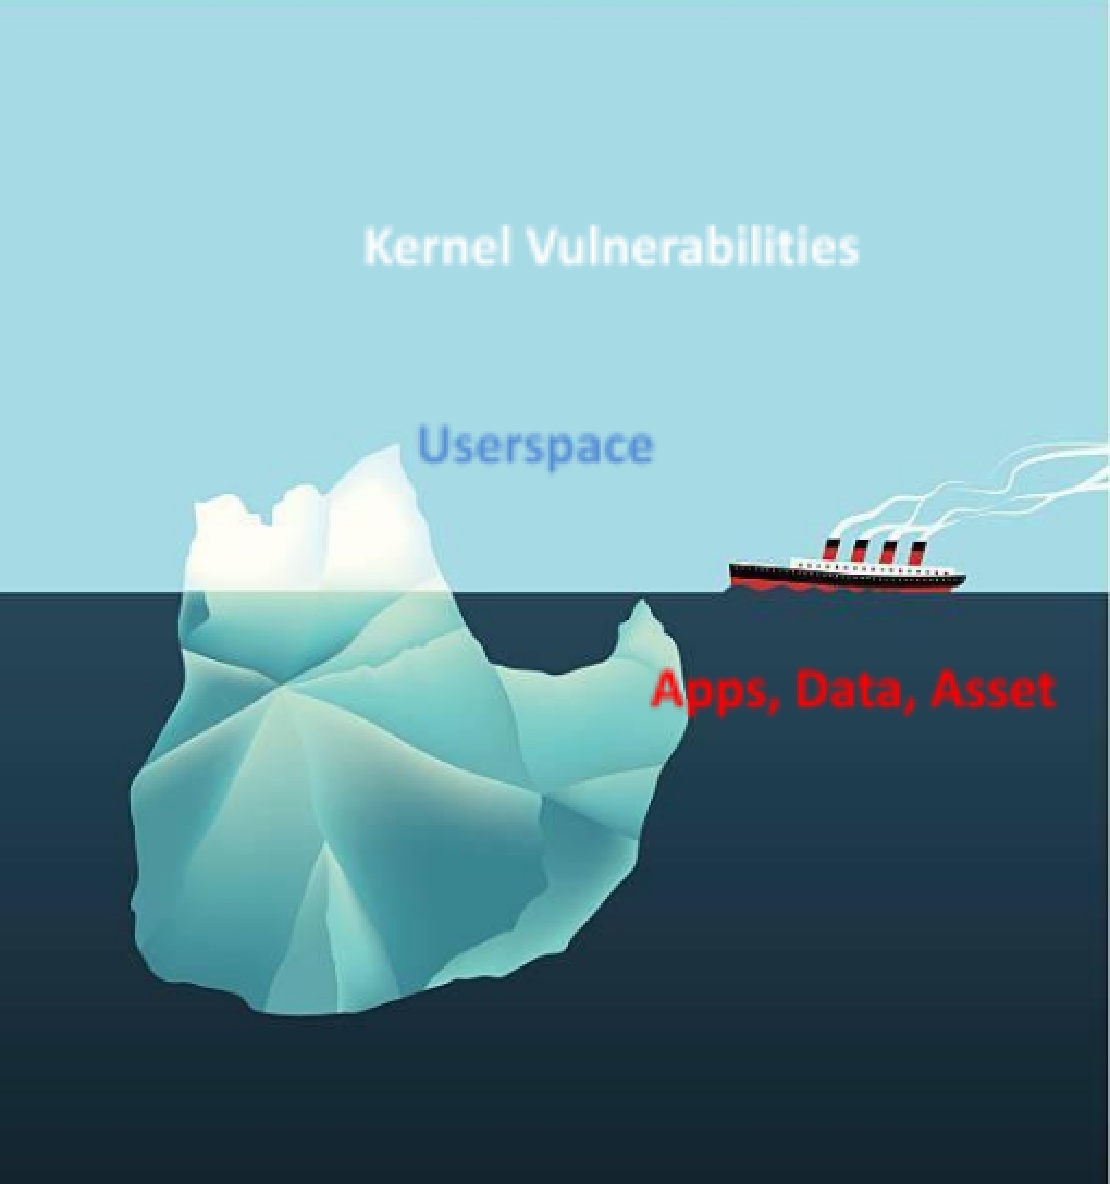 +PROTECTING LINUX AT KERNEL LEVEL WHY AND HOW